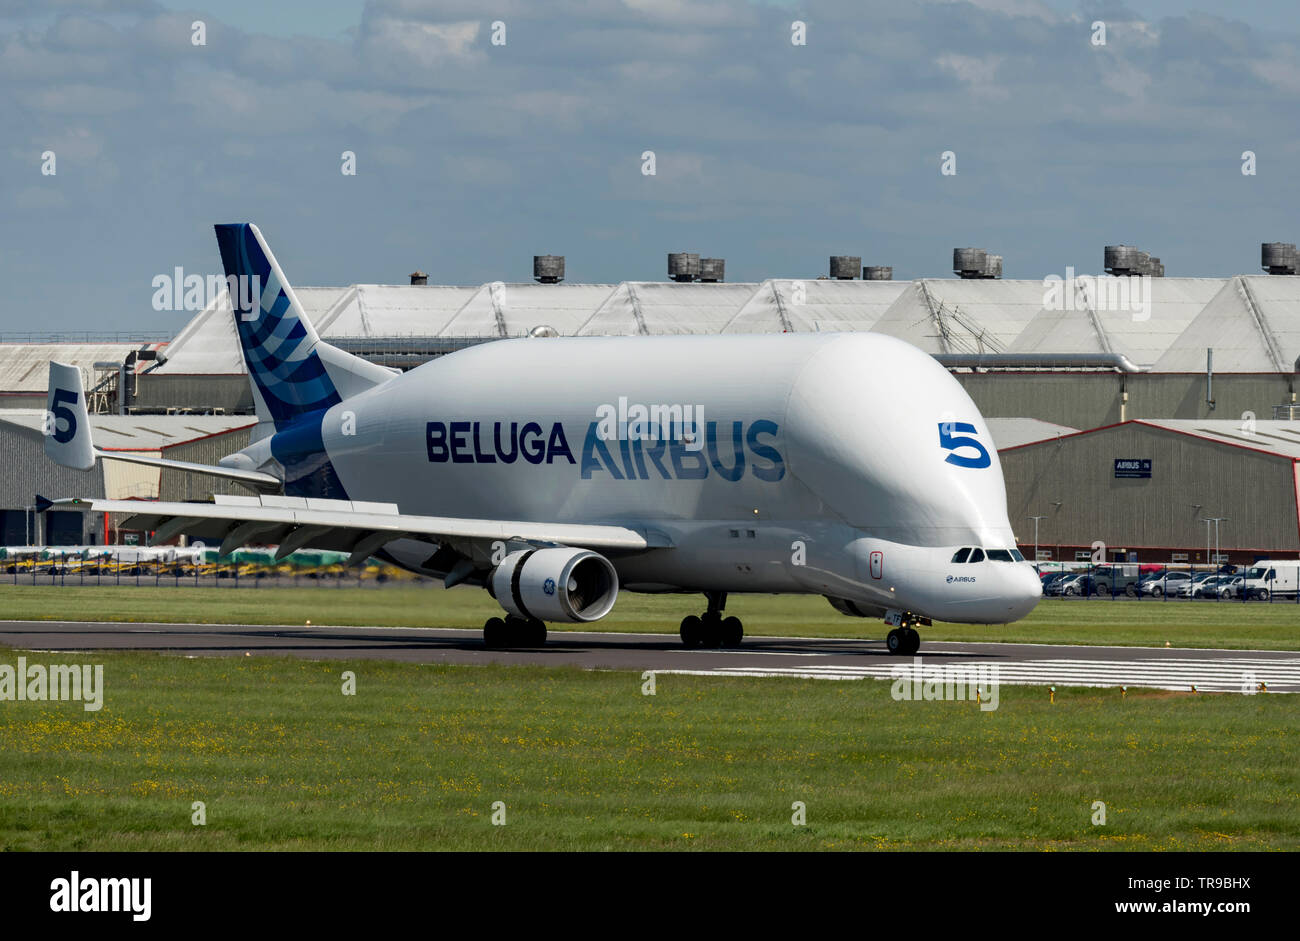 Airbus Airbus A300 600st Beluga F Gstf On Runway After Touchdown Landing Stock Photo Alamy